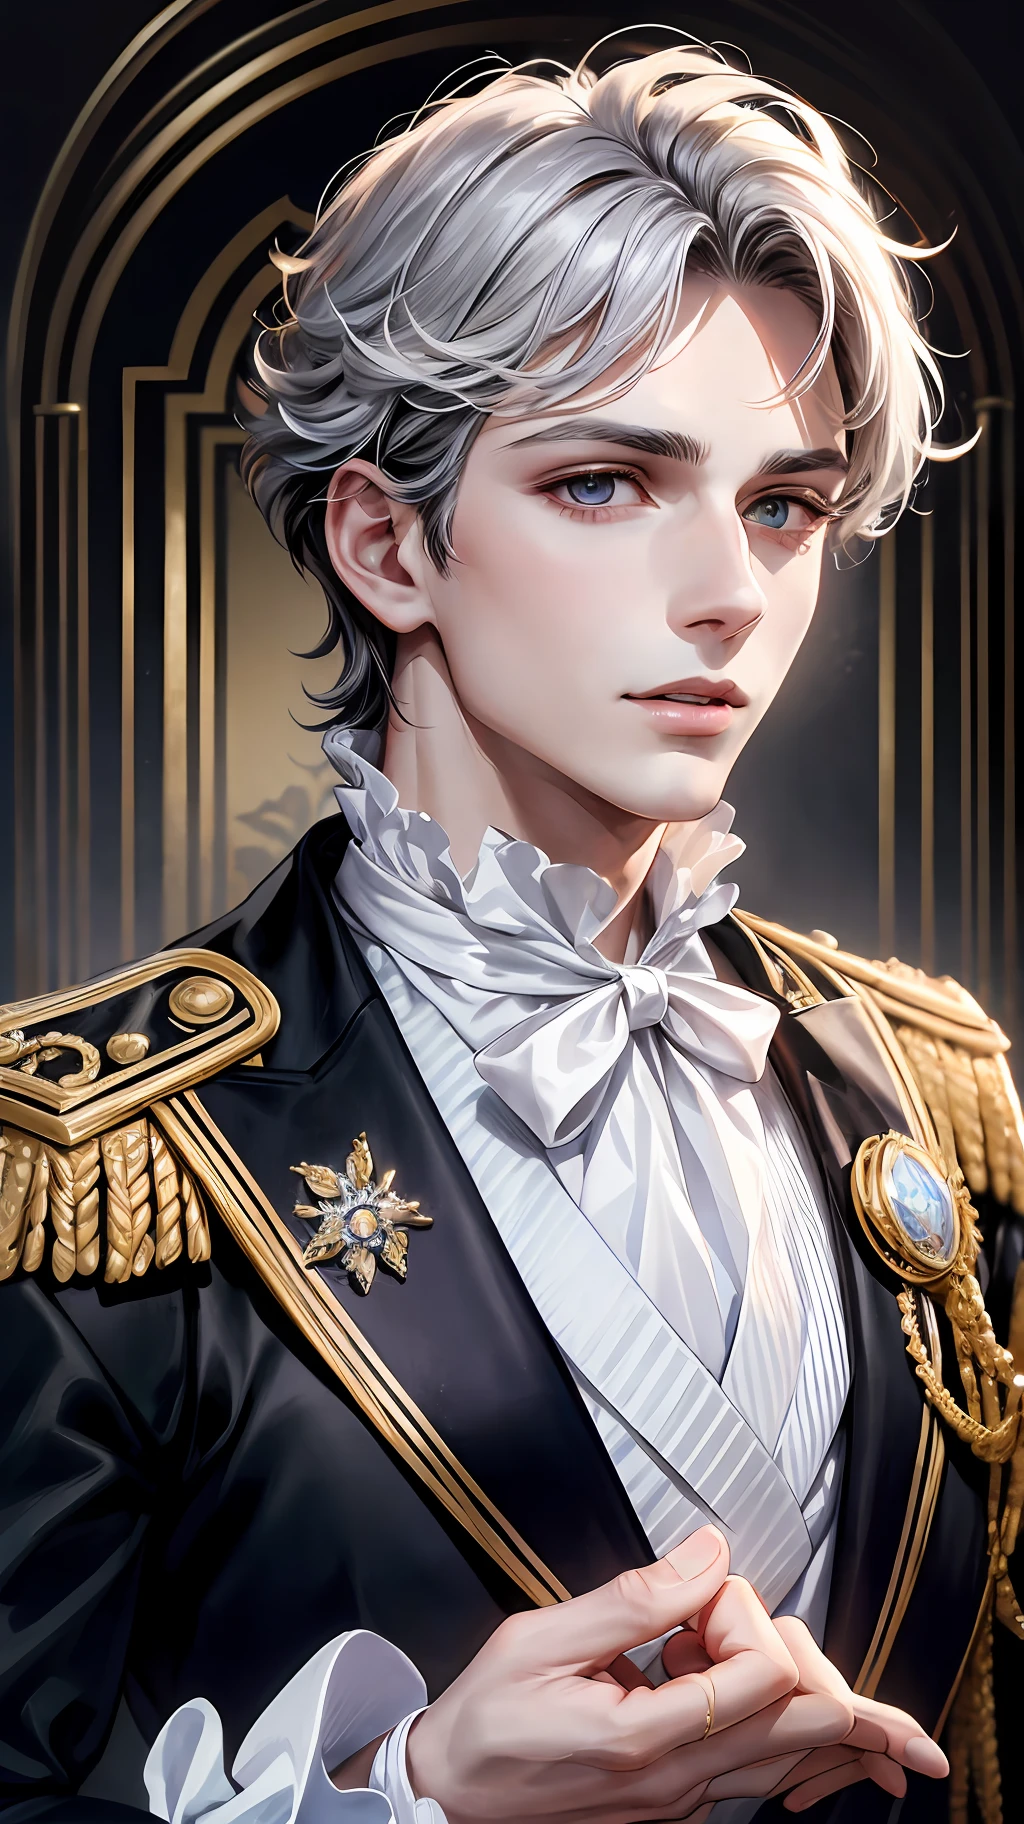 Prince, Young Man, Male, 1boy, Mature Male, Manly, portraying delicate eyes, Opal eyes, depicting delicate facial features, white uniform, white gloves, aristocratic dress, ribbon, medallion, extreme detail, delicate depiction, royalty, elegant, noble, royal dress, depth of field effect, background is palace, dramatic composition, dynamic pose, look at the camera